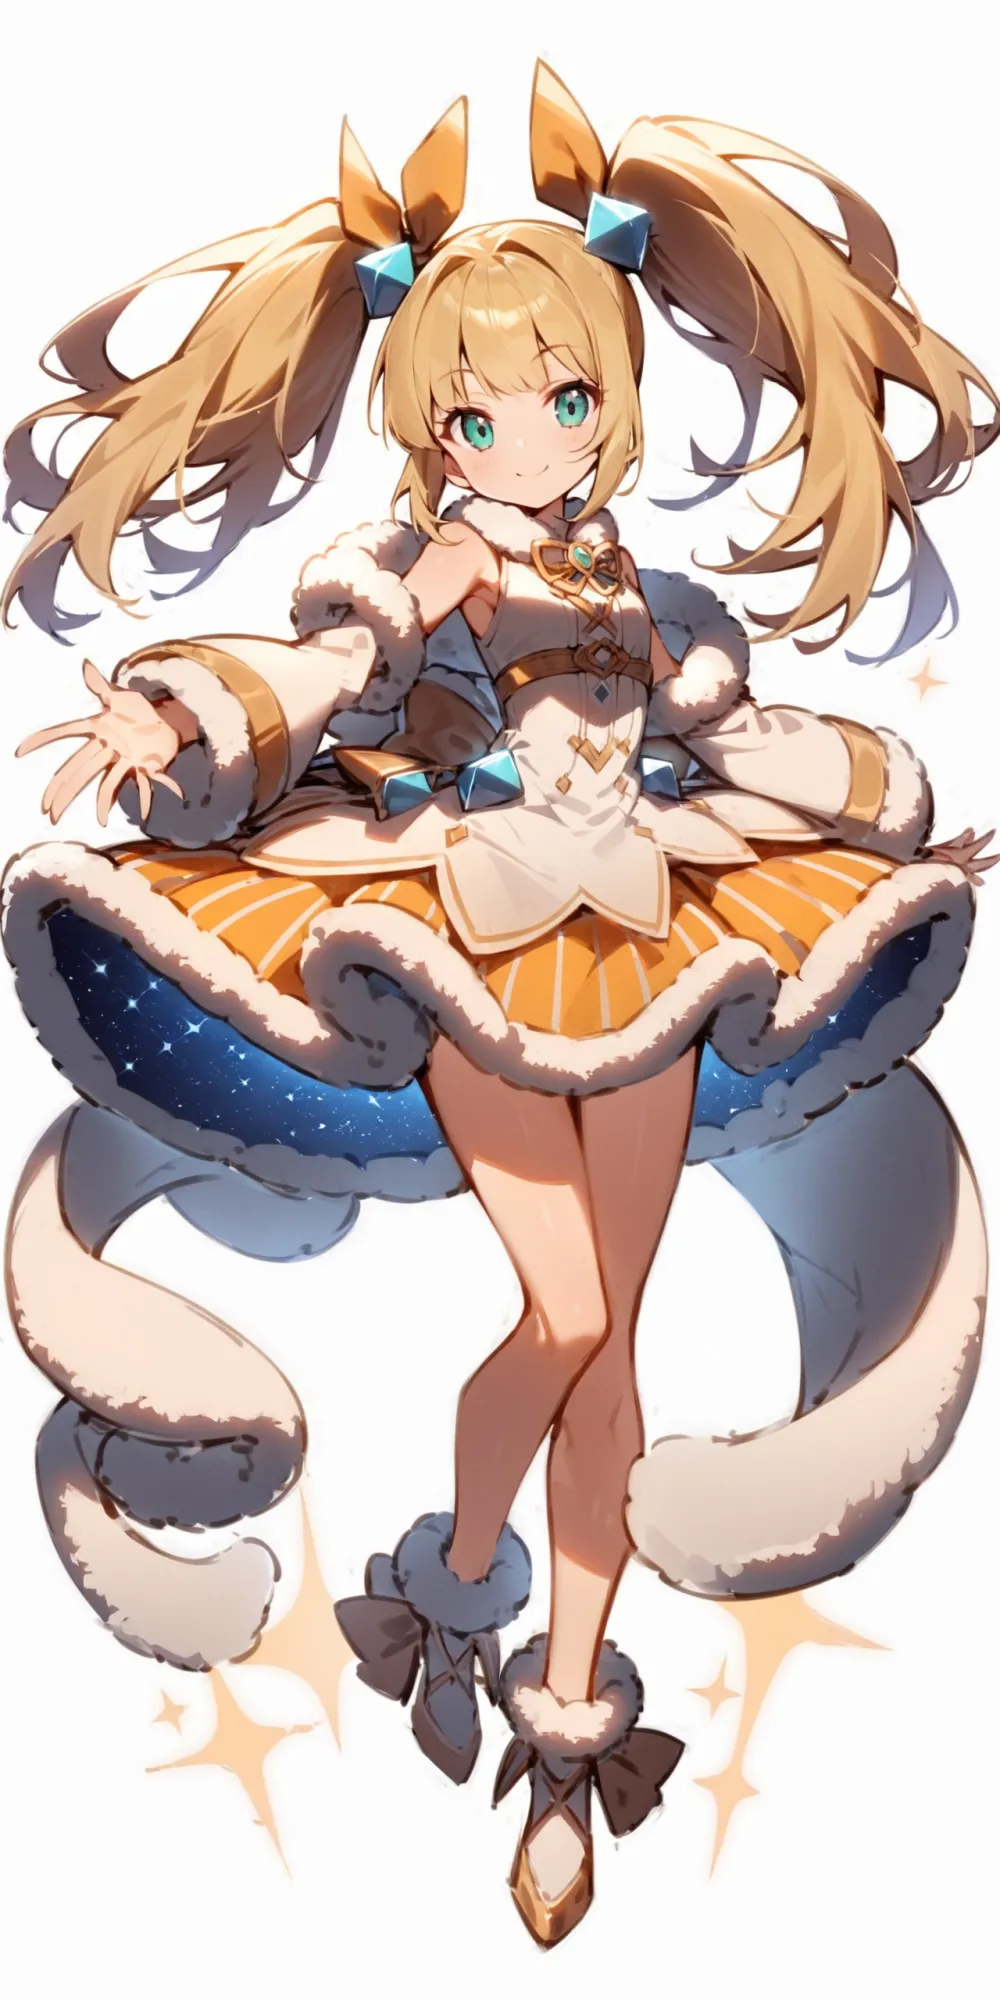 '1girl, fur-trimmed dress, blonde hair, twintails,\nsmile, closed mouth,\ntachi-e, fullbody, white background,\nAlice in glitterworld\nNegative prompt: (worst quality, low quality:1.4), nsfw\nSteps: 35, Sampler: DPM++ 2M SDE Karras, CFG scale: 7, Seed: 1, Size: 640x1280, Model hash: 642b08ca49, Model: ConfusionXL2.0_fp16_vae, VAE hash: 63aeecb90f, VAE: sdxl_vae_0.9.safetensors, Denoising strength: 0.6, Clip skip: 2, Hires upscale: 2, Hires steps: 15, Hires upscaler: ESRGAN_4x, Eta: 0.68, Version: v1.7.0'